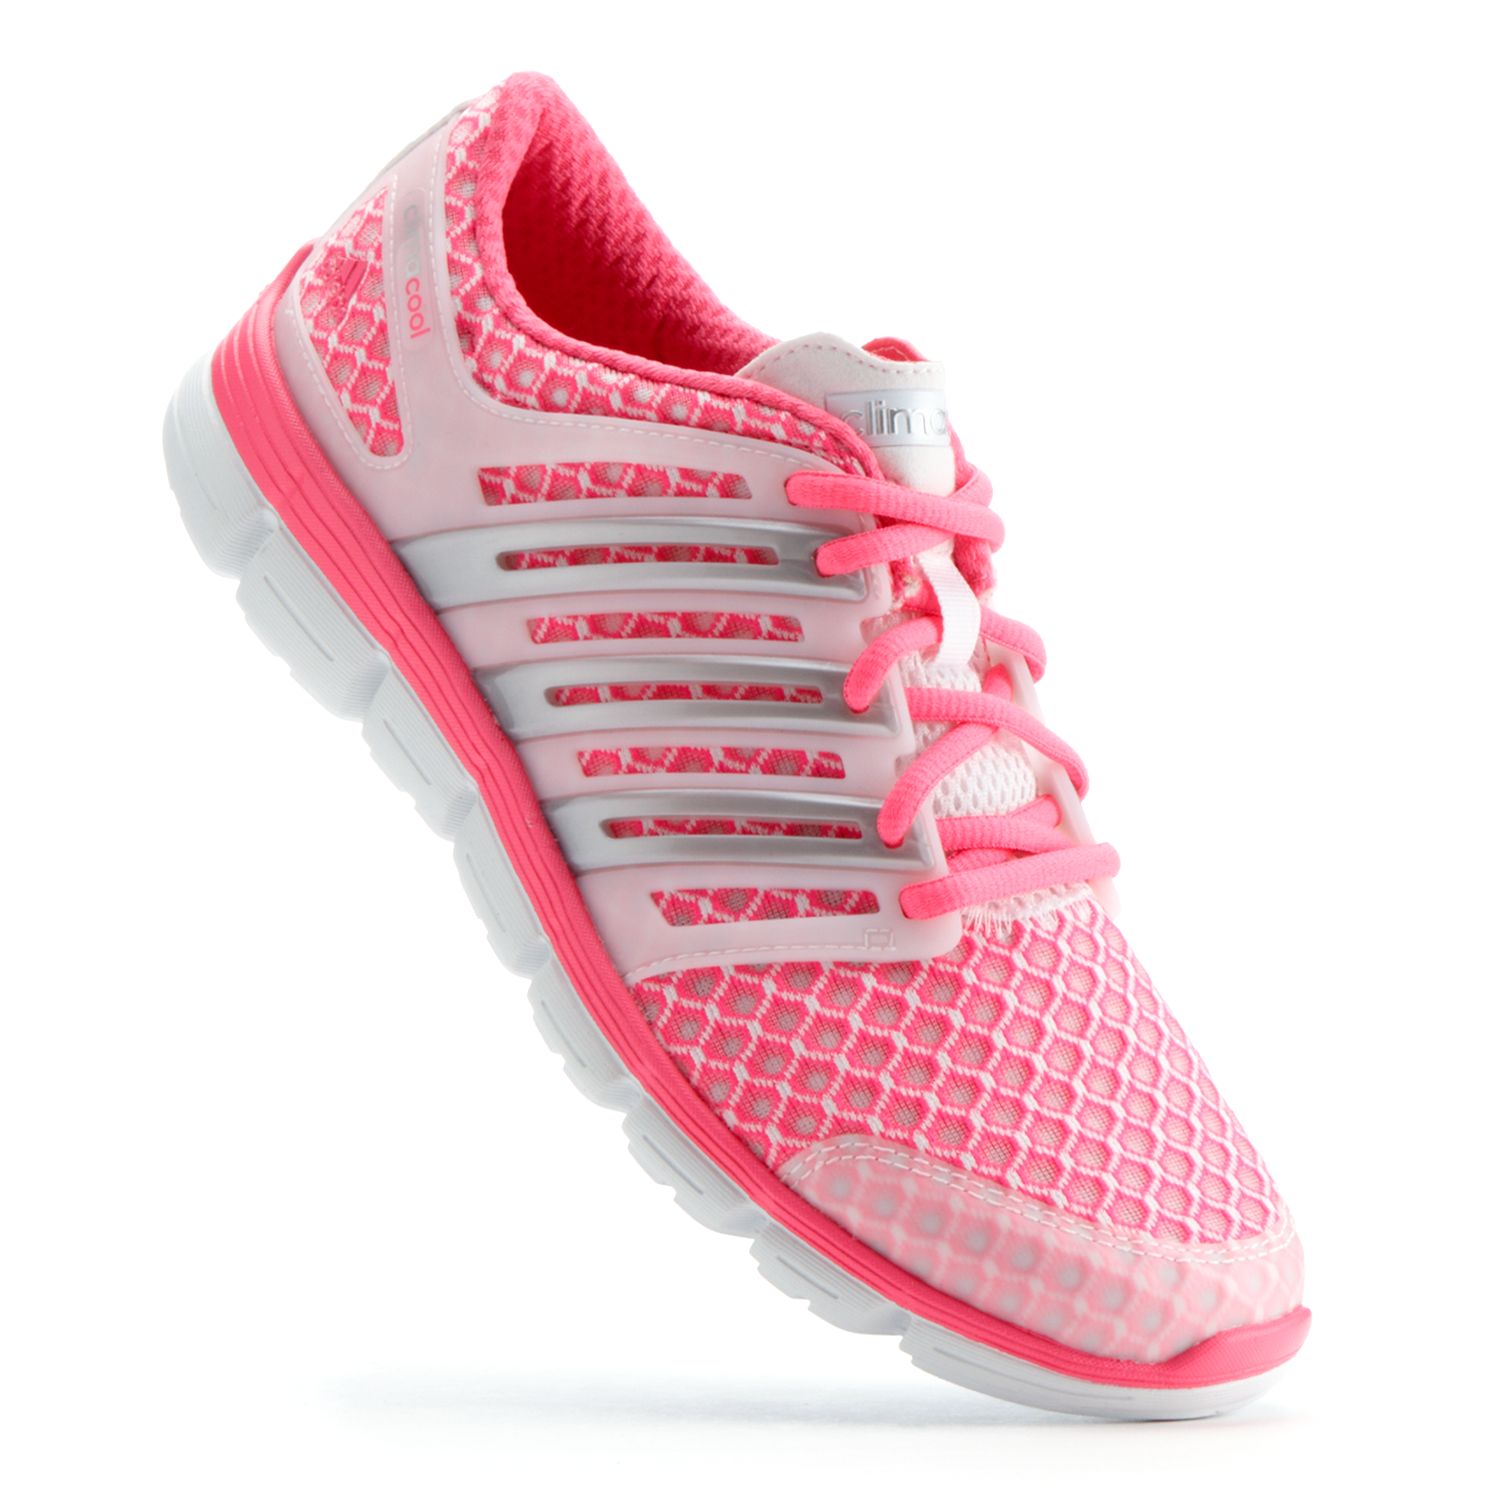 adidas ClimaCool Crazy Running Shoes - Women